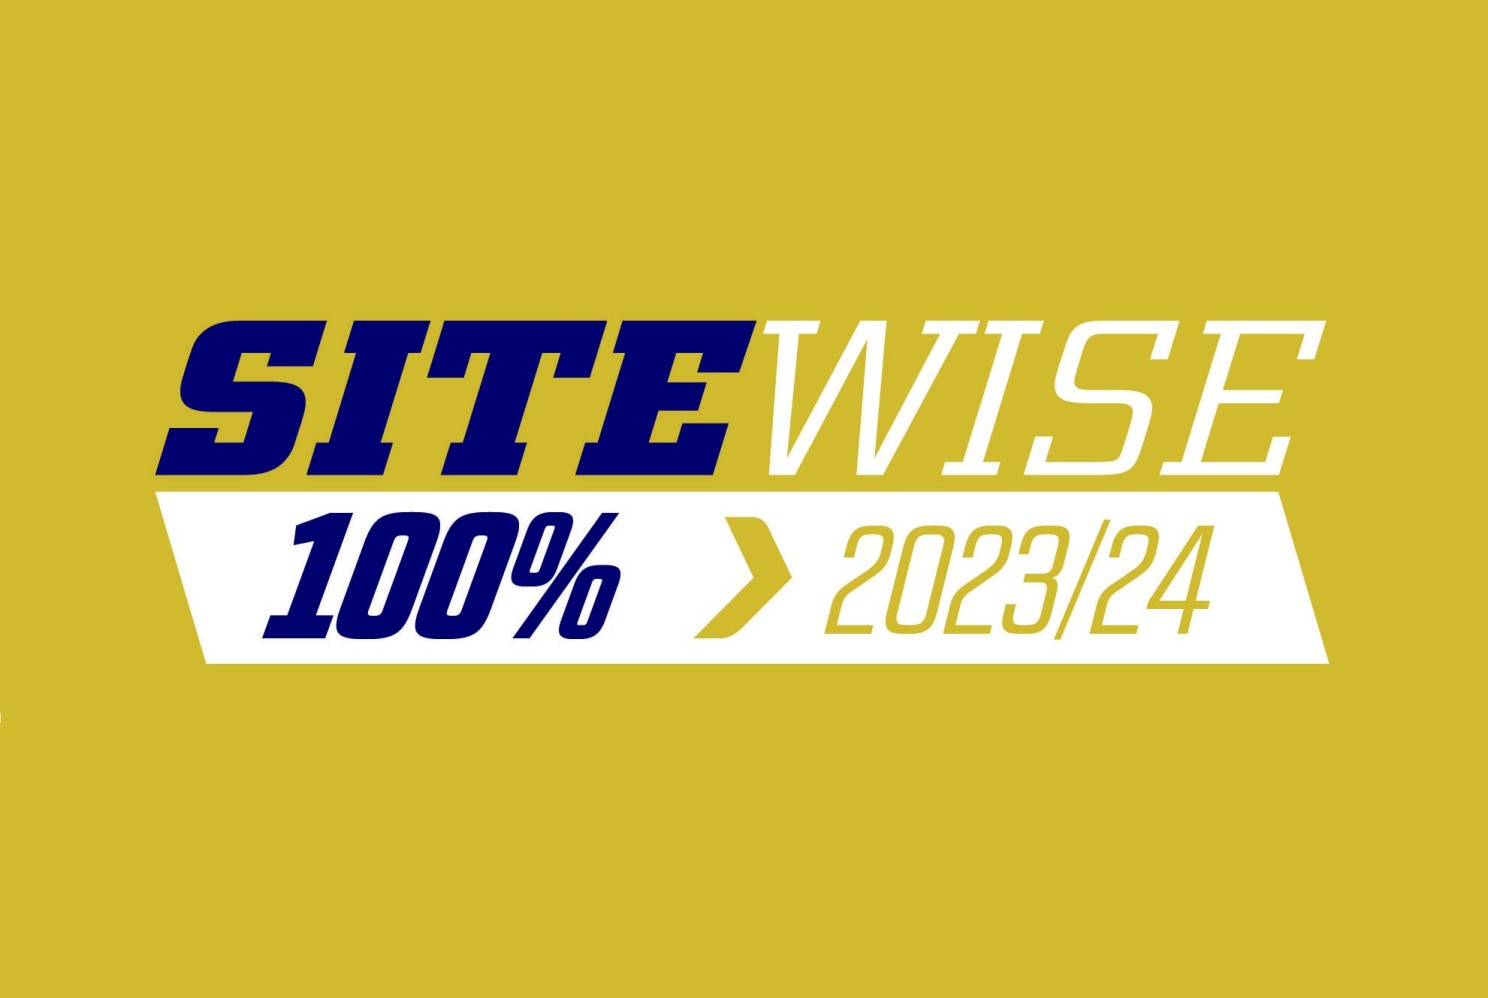 100% in our SiteWise prequal assessment